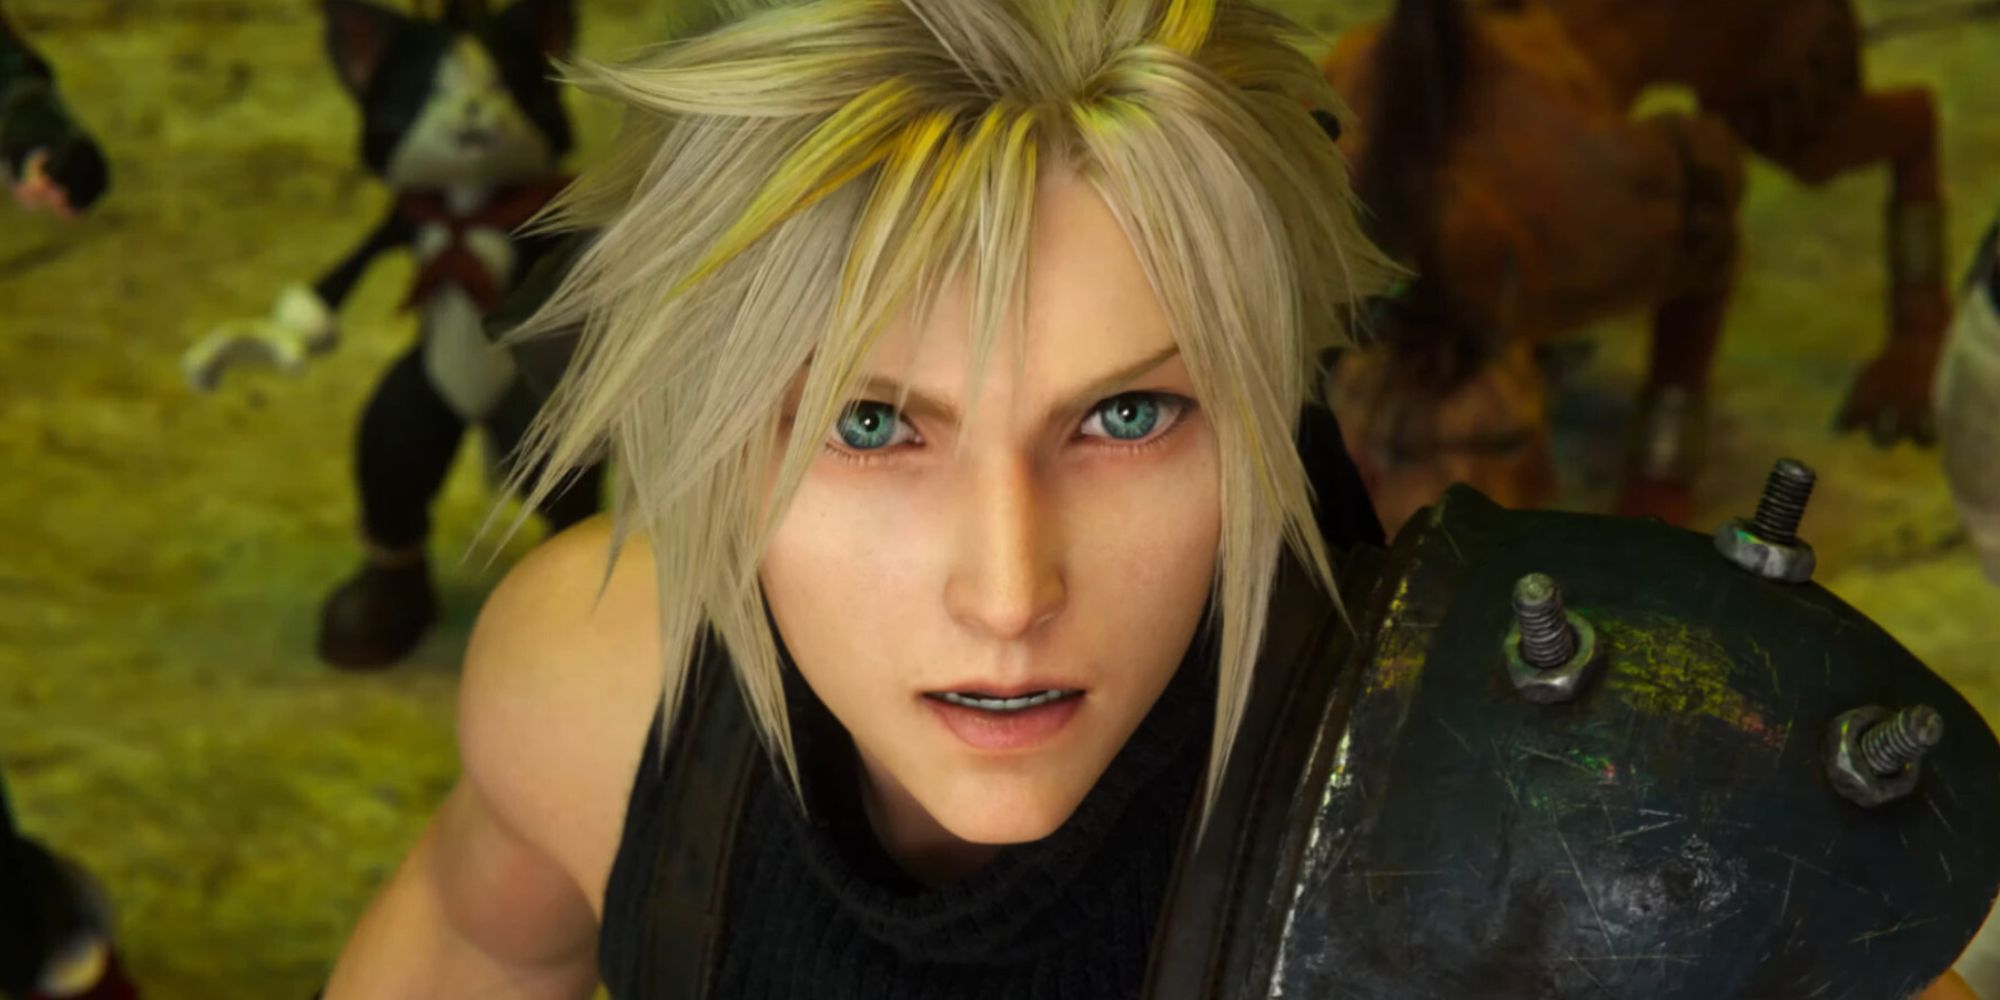 Cloud about to counter Sephiroth in Final Fantasy 7 Rebirth.